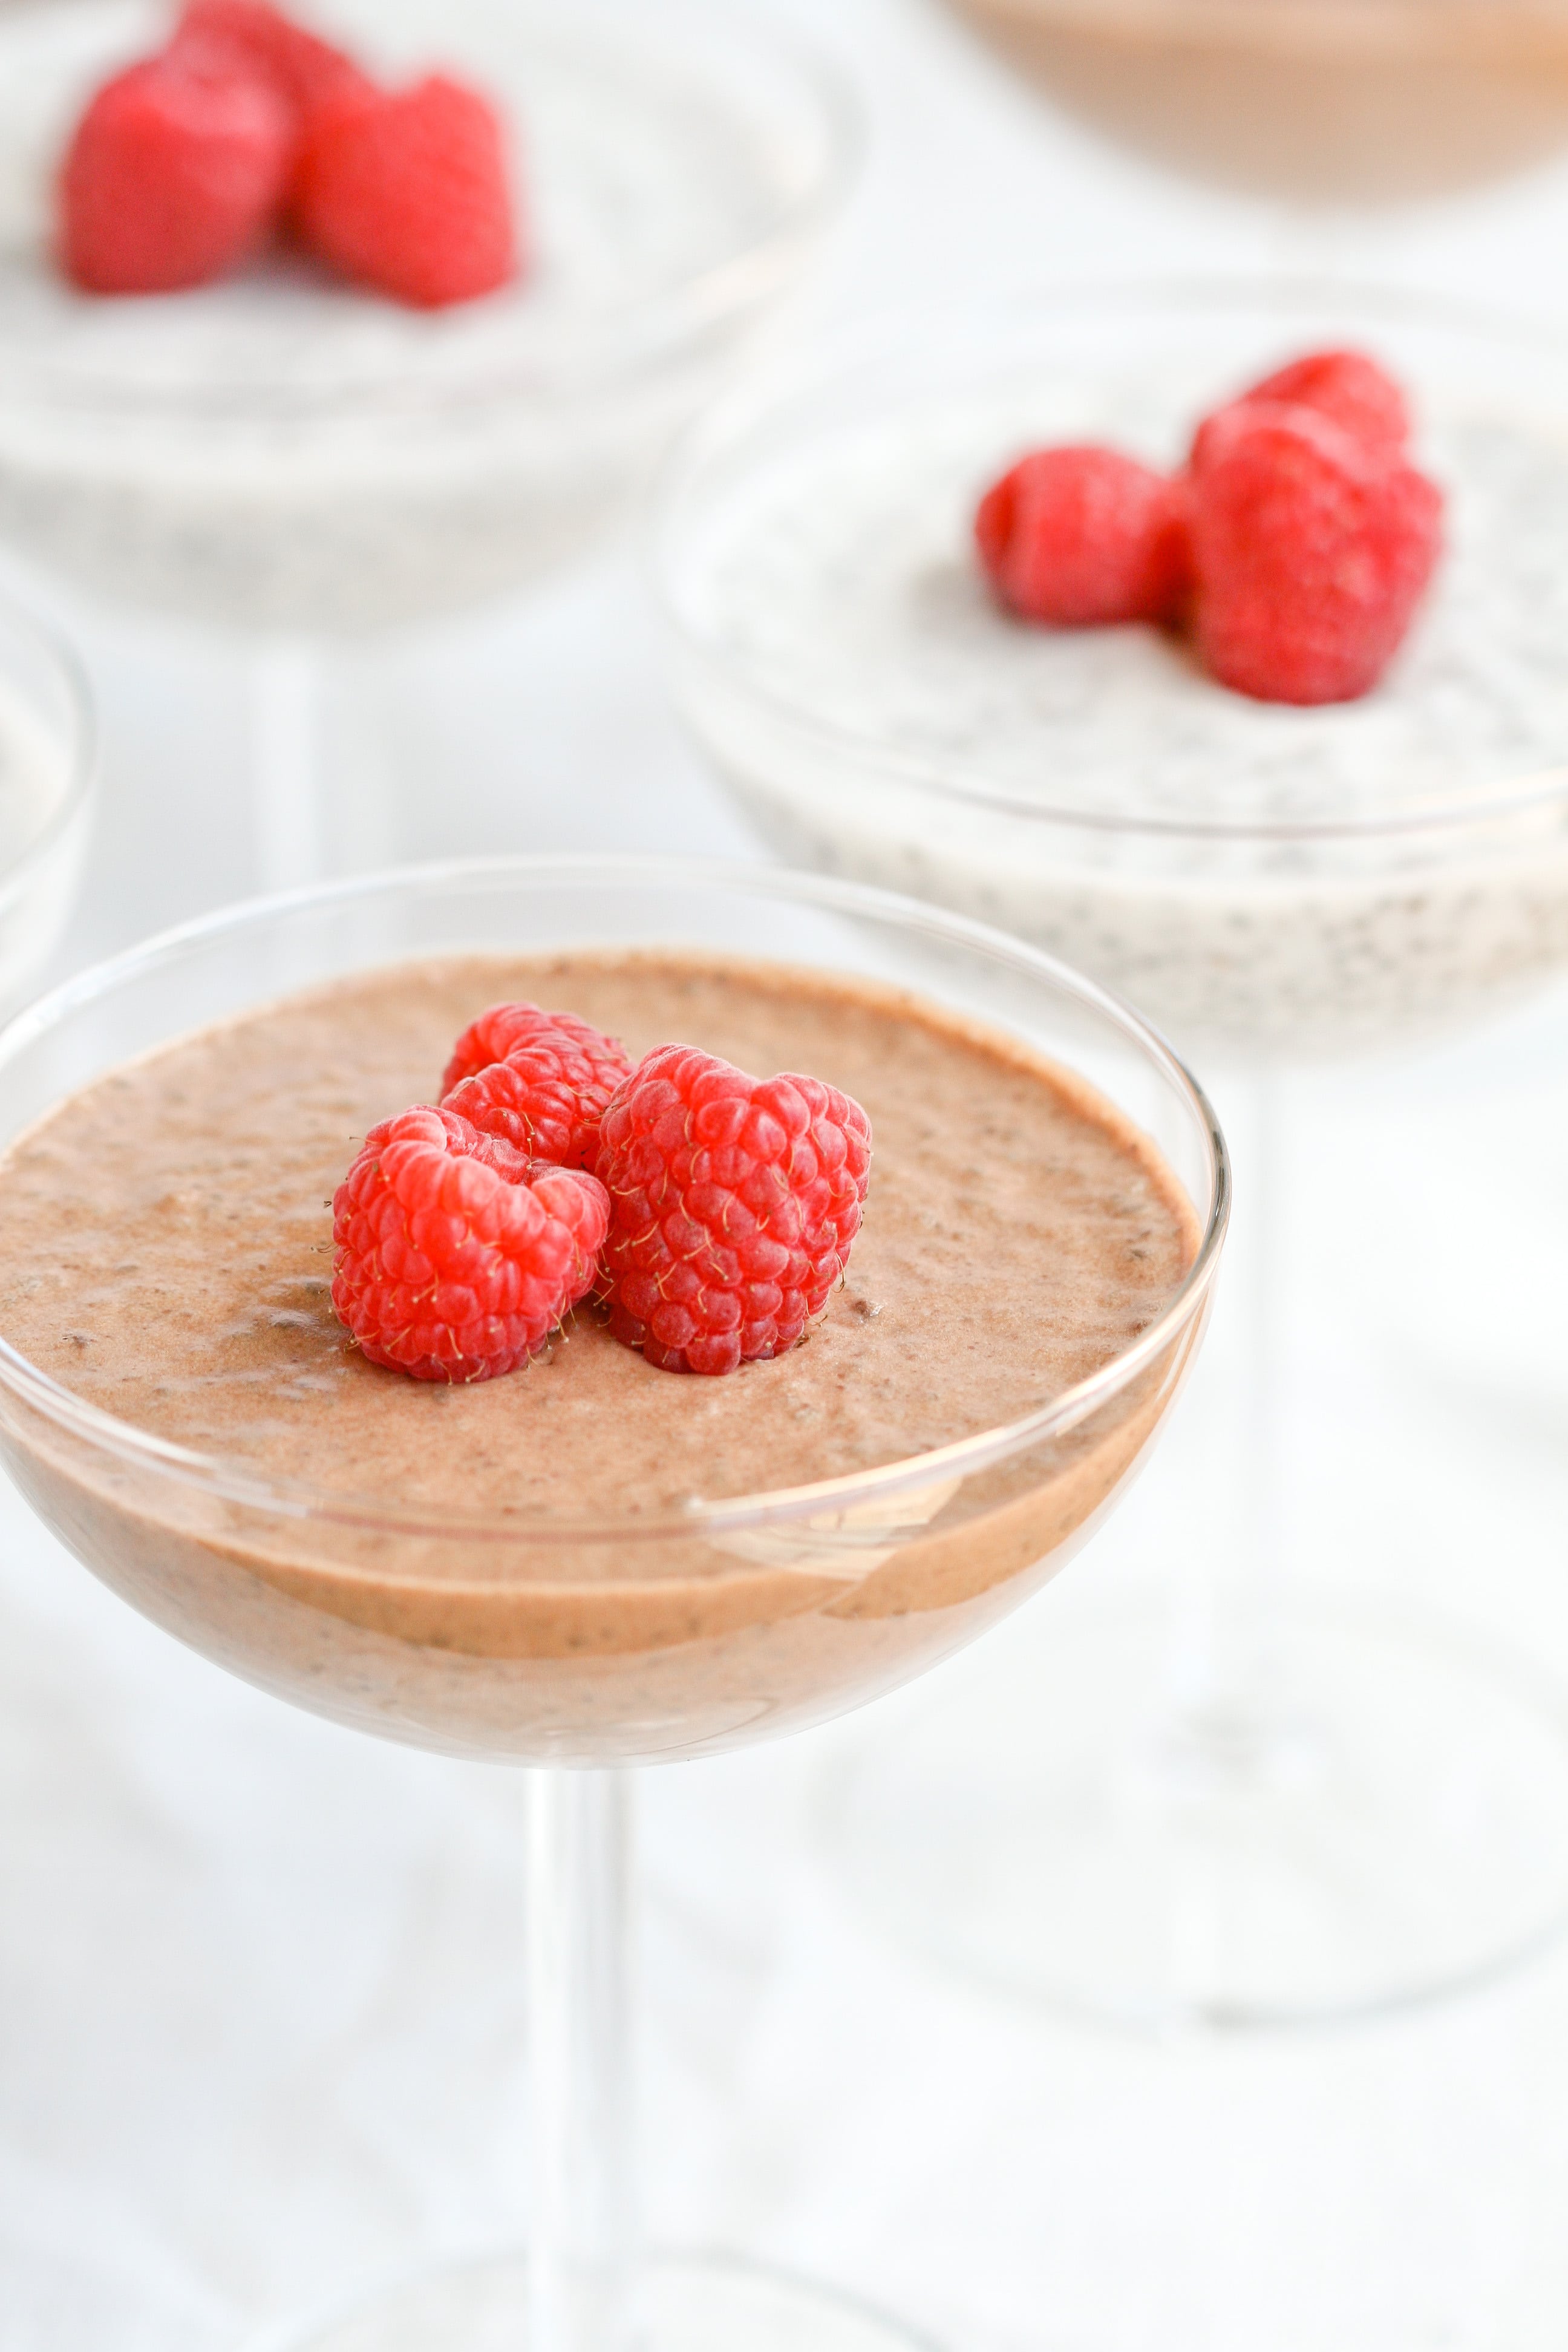 Chia Seed Pudding Recipe (5 Flavors!) - Wholesome Yum